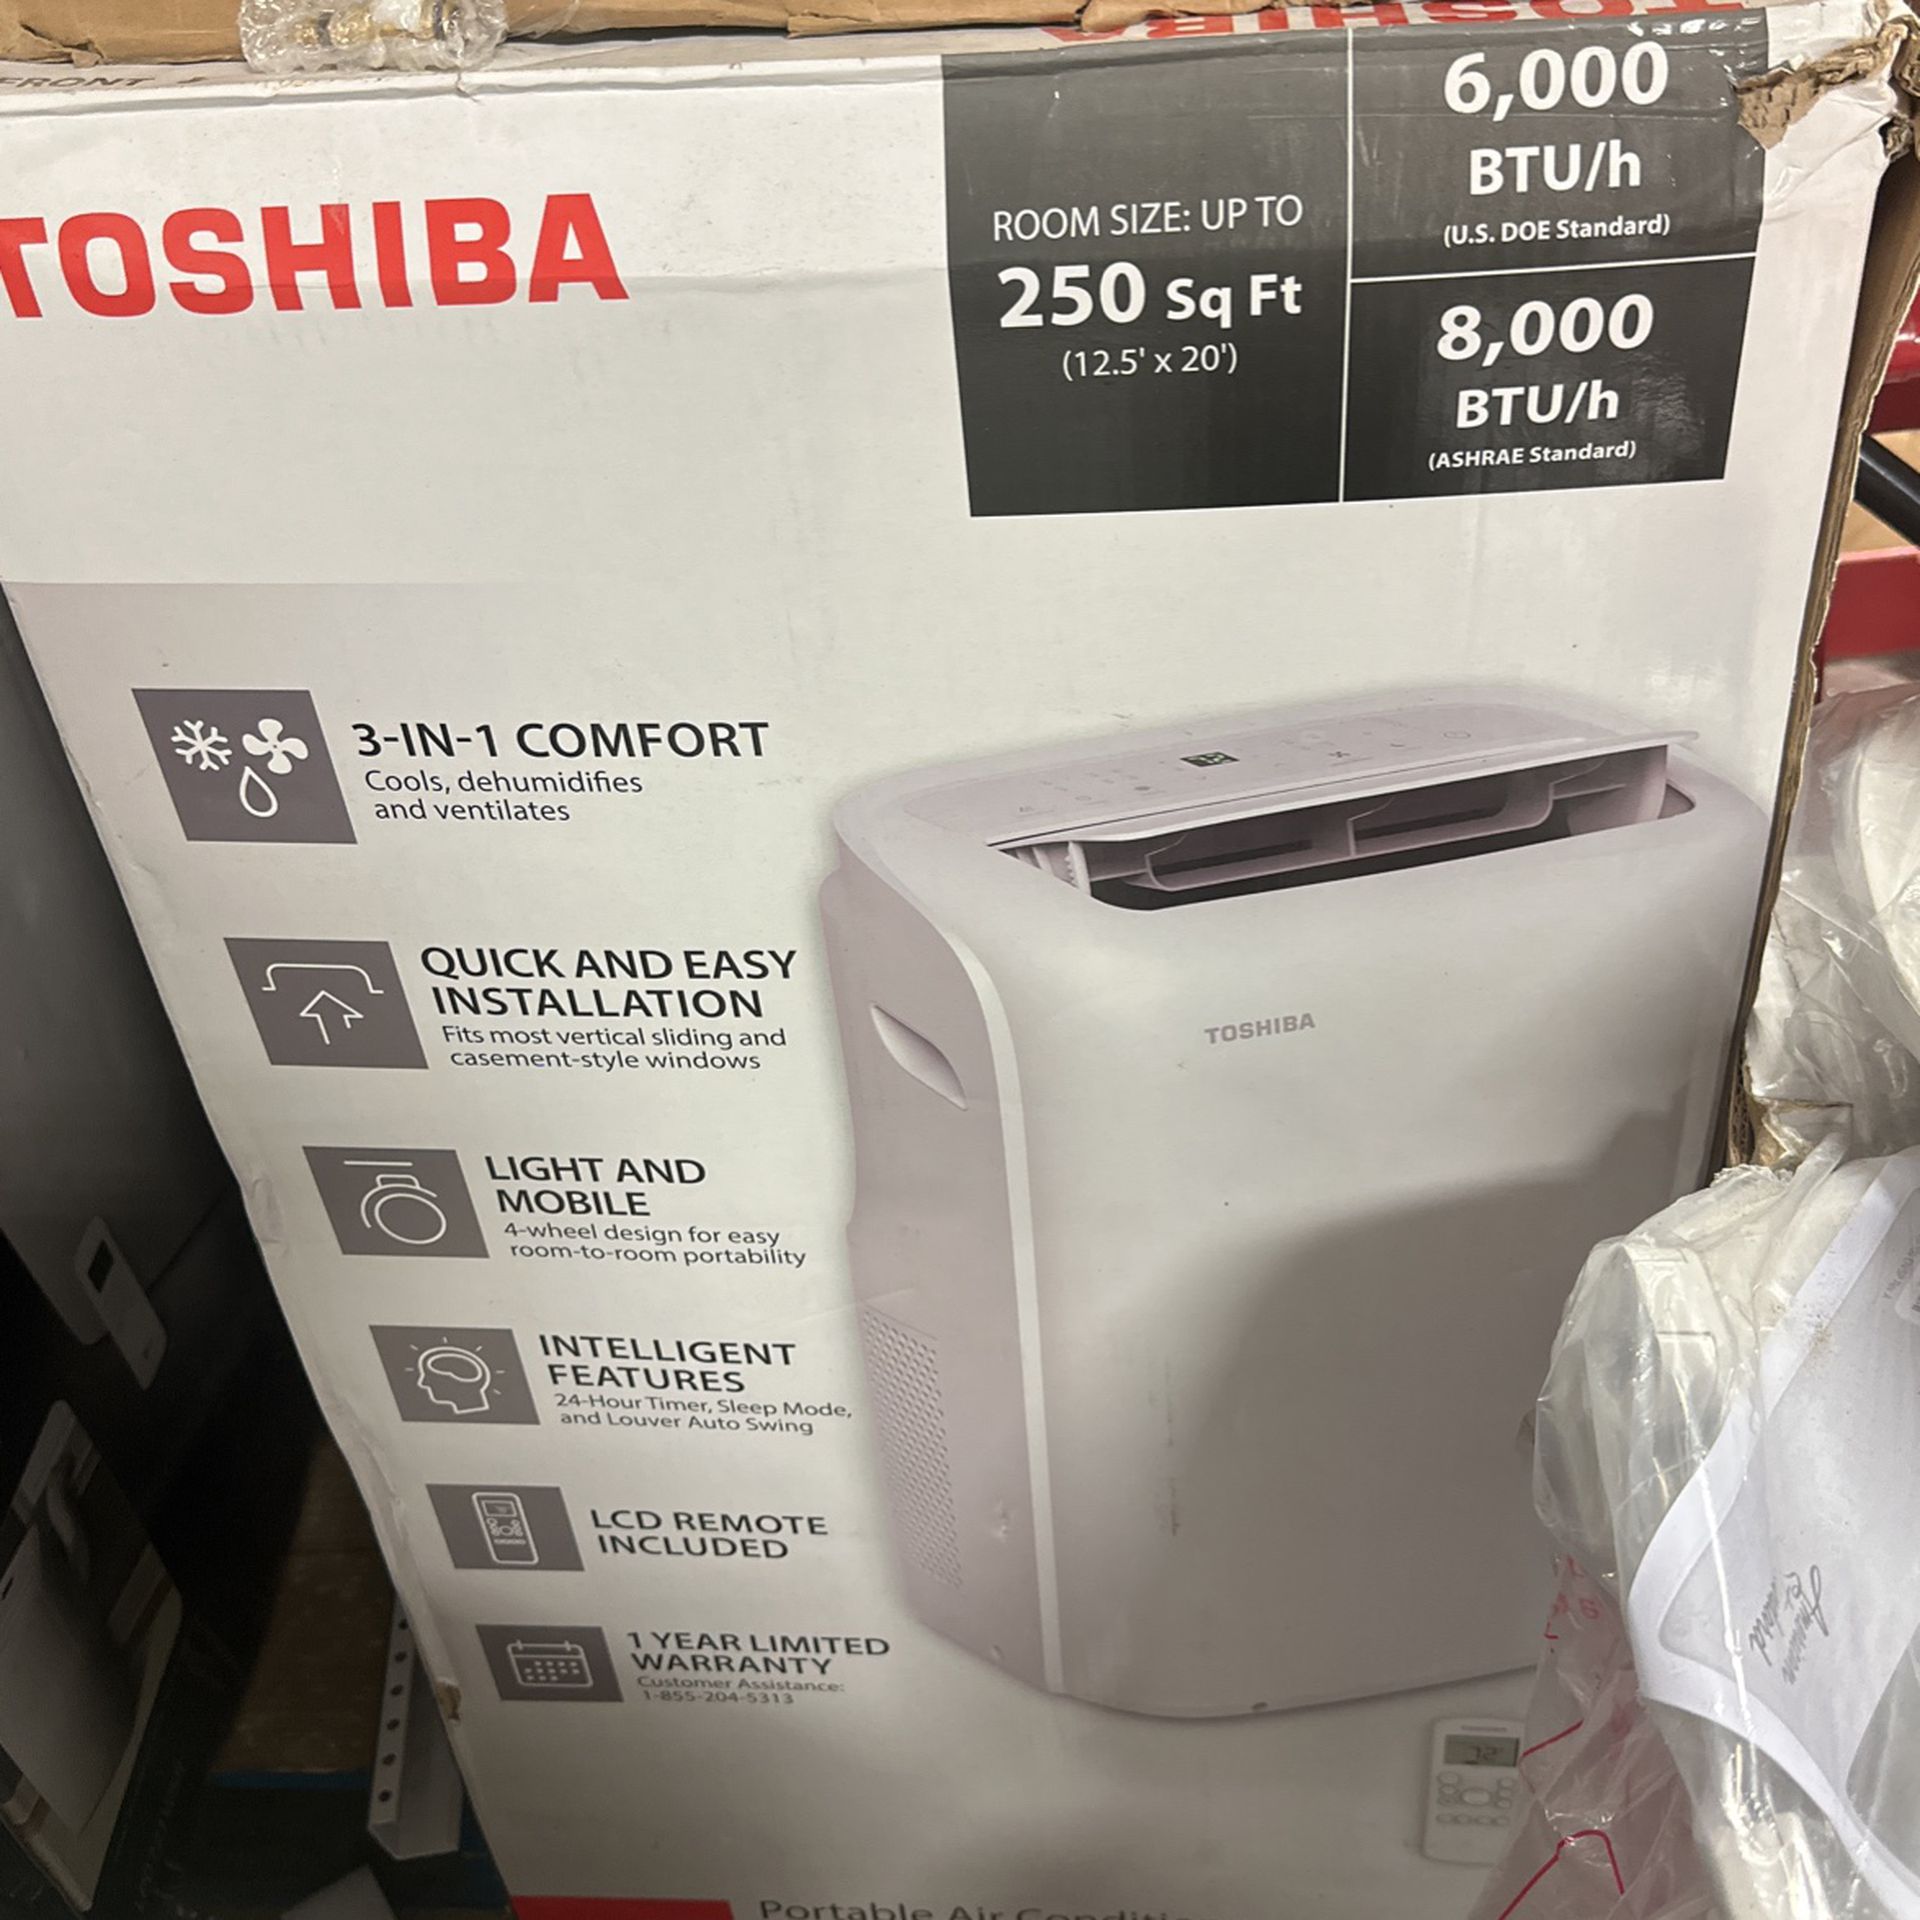 Toshiba 8,000 BTU (6,000 BTU DOE) 115-Volt Portable Air Conditioner with Dehumidifier Mode and Remote for rooms up to 250 sf